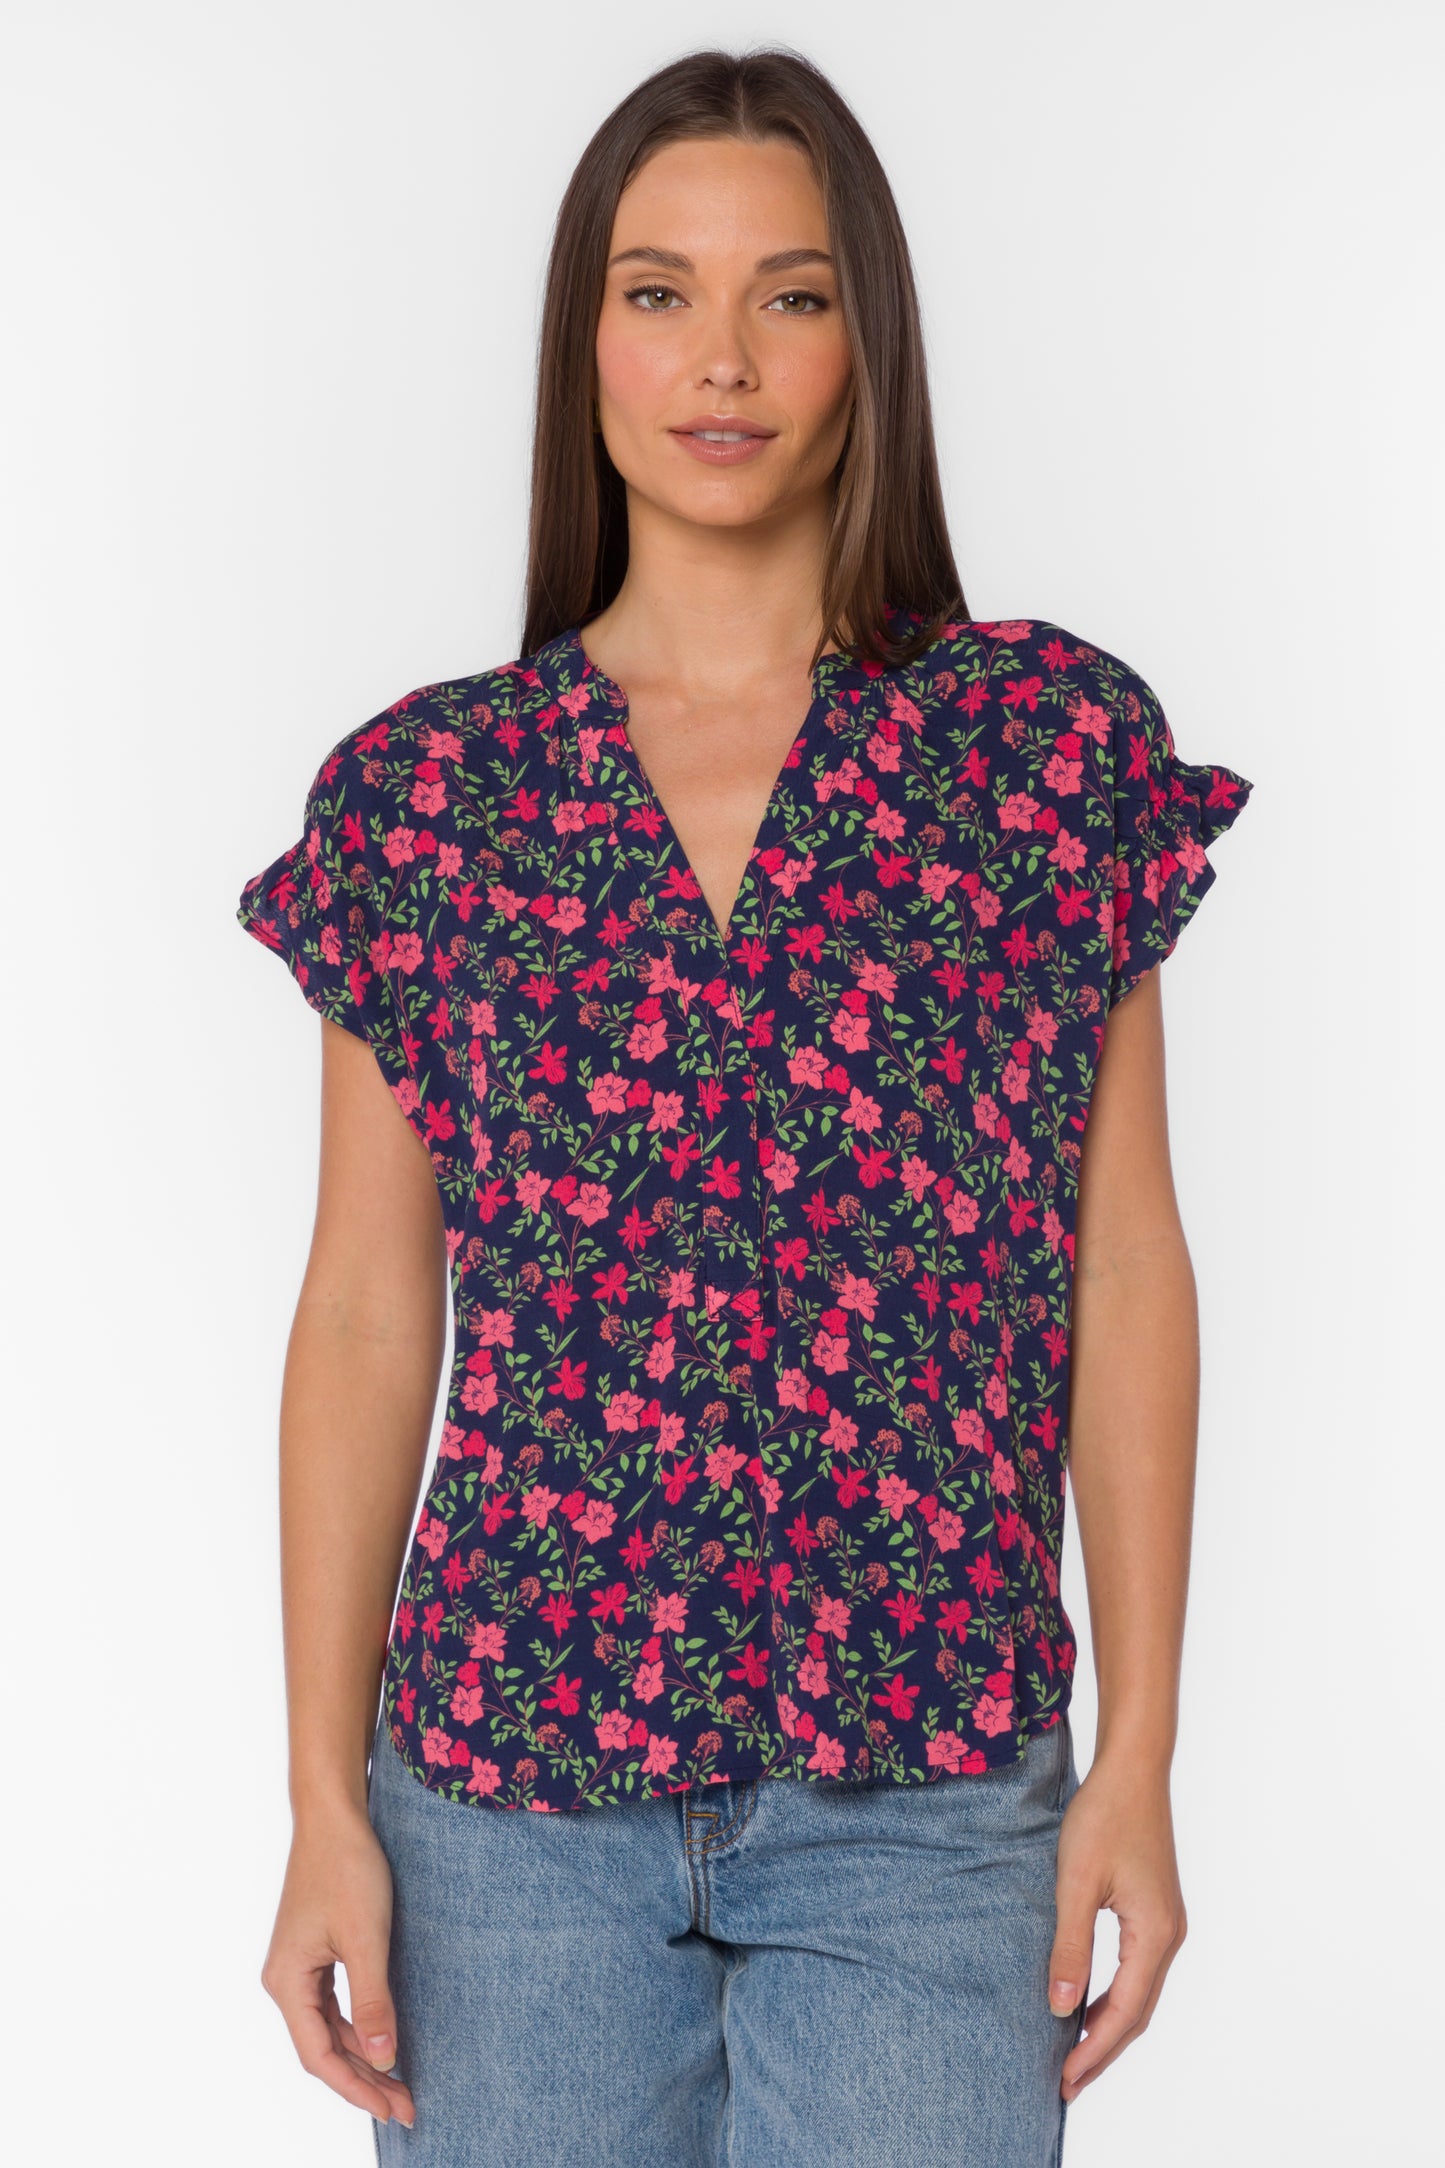 Floral Navy Charm Top